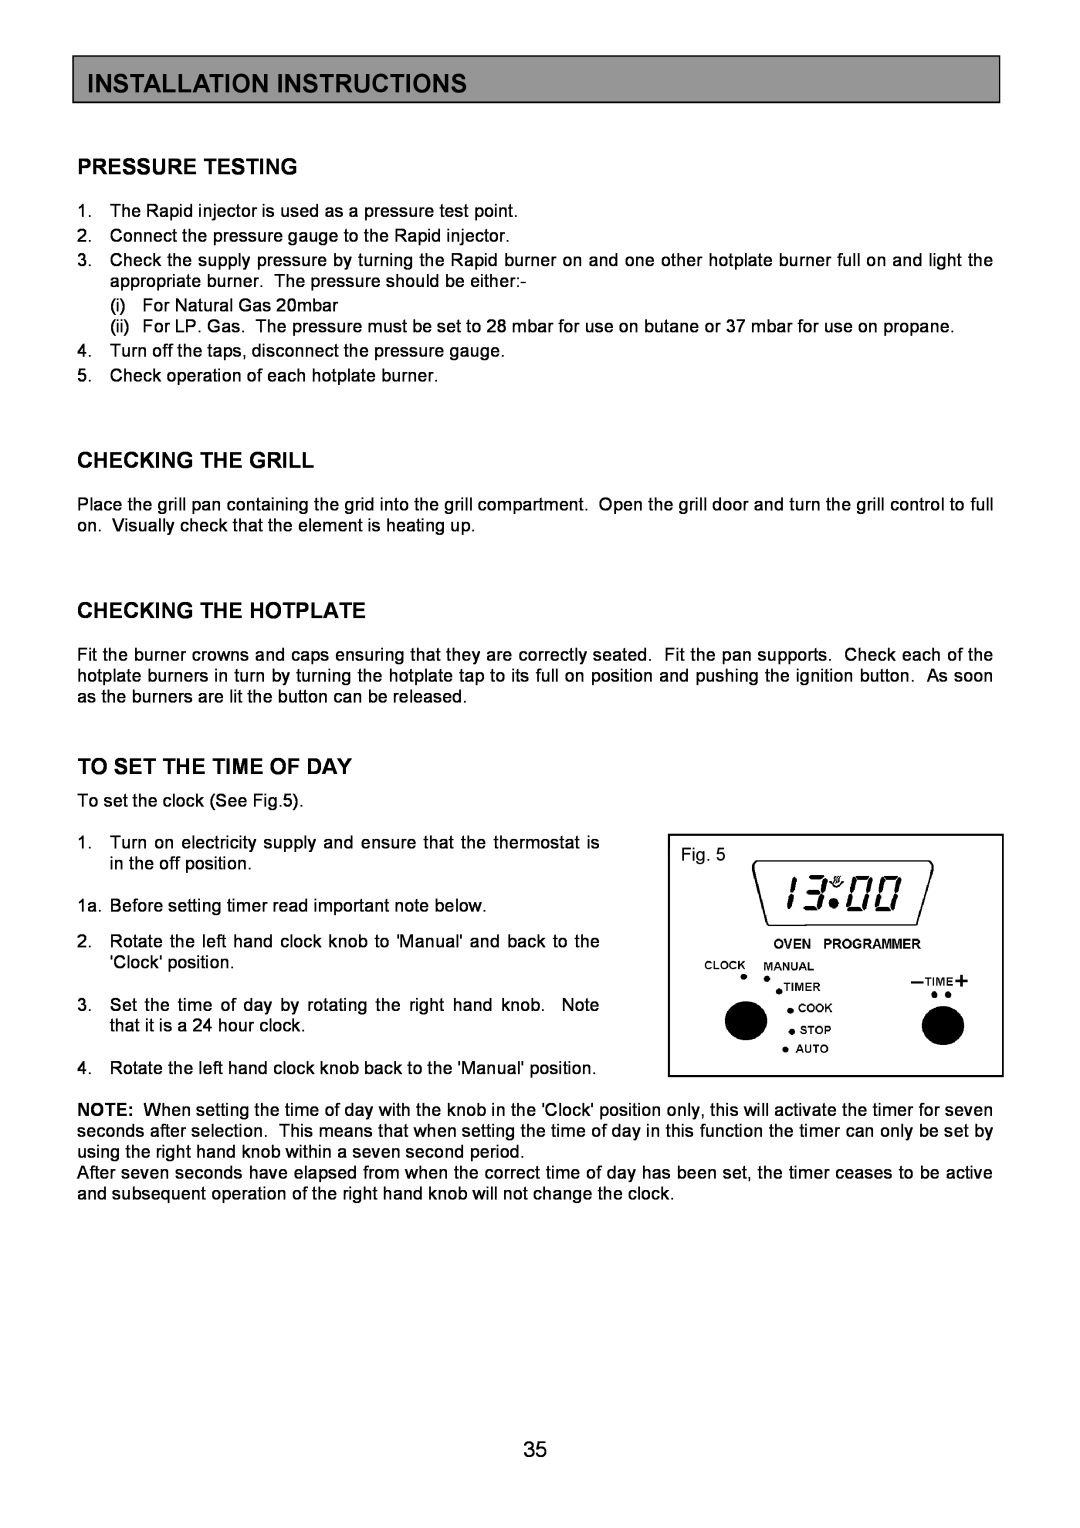 Zanussi ZCM 8021 manual Pressure Testing, Checking The Grill, Checking The Hotplate, Installation Instructions 